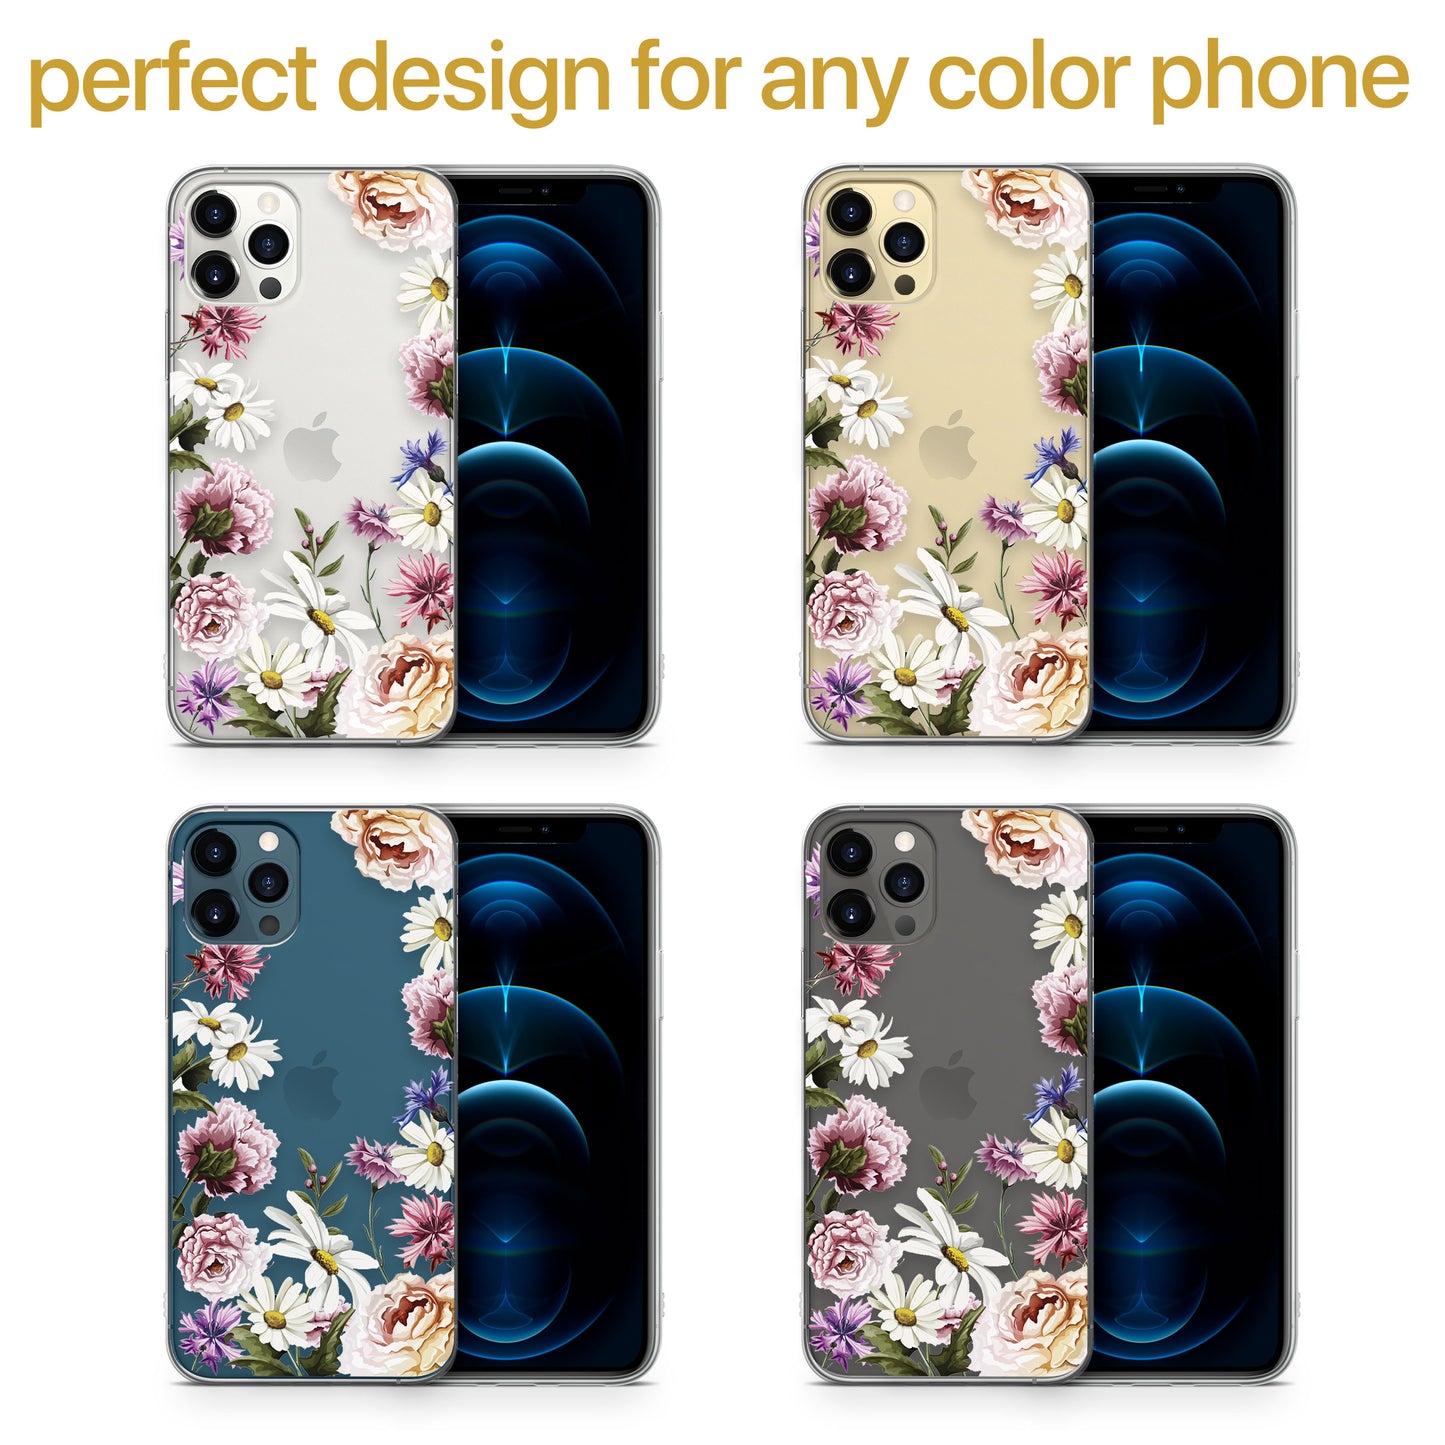 TPU Case Clear case with (Carnation Flowers) Design for iPhone & Samsung Phones